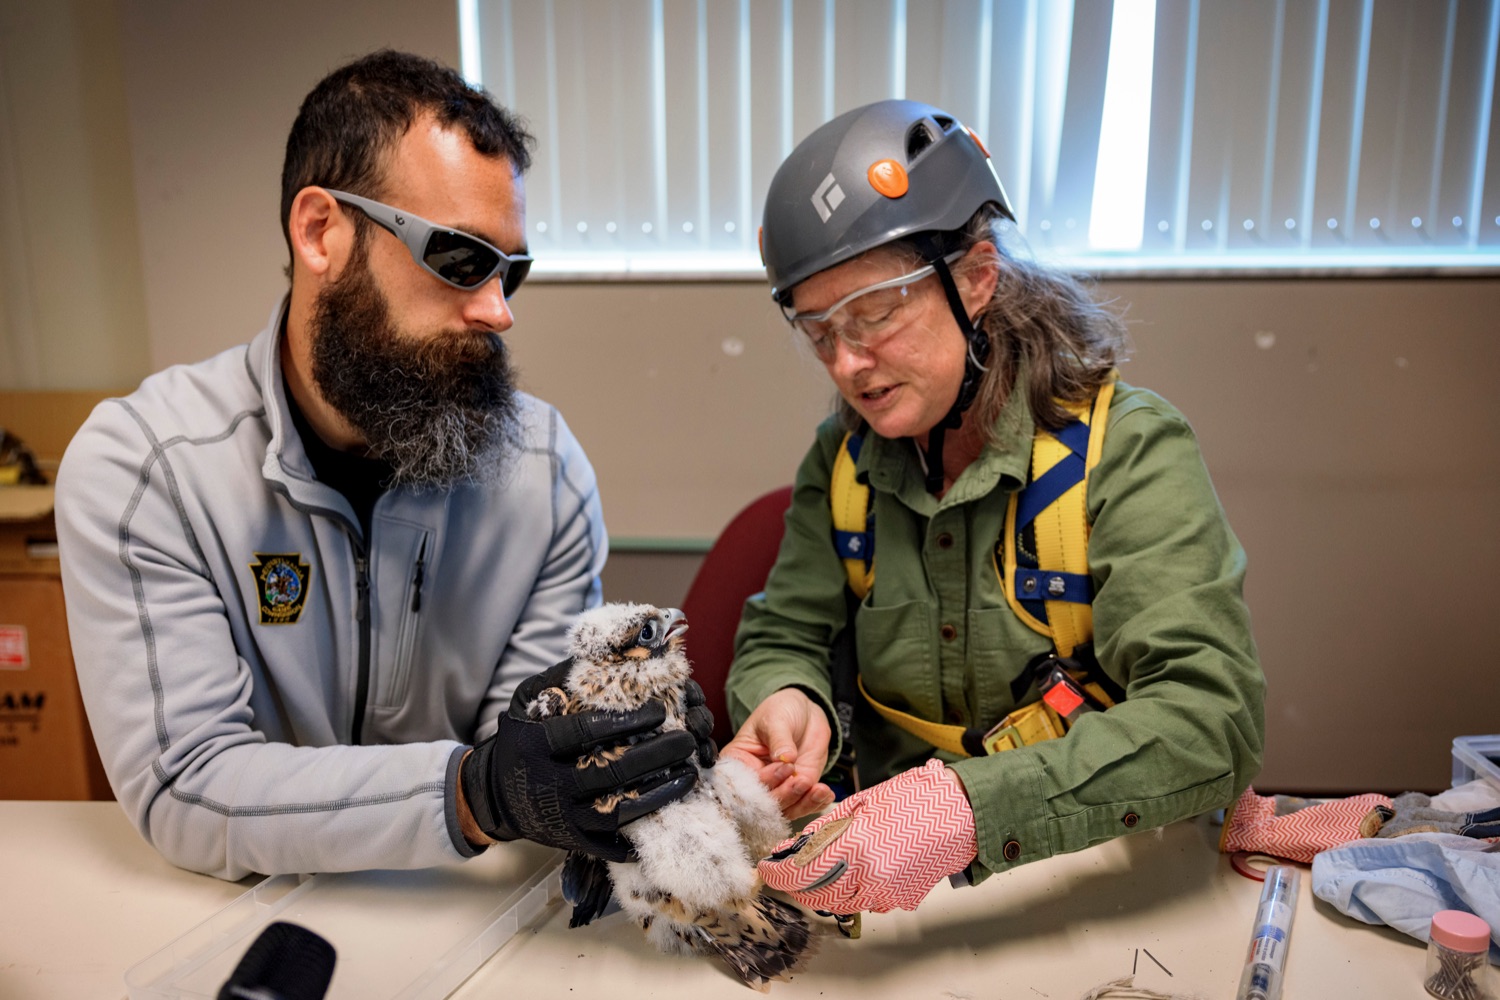 PA Game Commissions Andrew DiSalvo, wildlife veterinarian, left, and Patti Barber, endangered bird specialist, right, band one of three peregrine falcon nestlings inside the Rachel Carson State Office Building on Wednesday, June 7, 2023. Banding the falcons allows biologists and birdwatchers from all over the continent to track the birds and help us learn more about where they travel, how long theyve lived, and whether they'll establish new nests in other places. Falcons born on the ledge at the Rachel Carson building have been tracked to locations from Florida all the way to Canada.<br><a href="https://filesource.amperwave.net/commonwealthofpa/photo/23186_DEP_FalconBanding_NK_020.jpg" target="_blank">⇣ Download Photo</a>